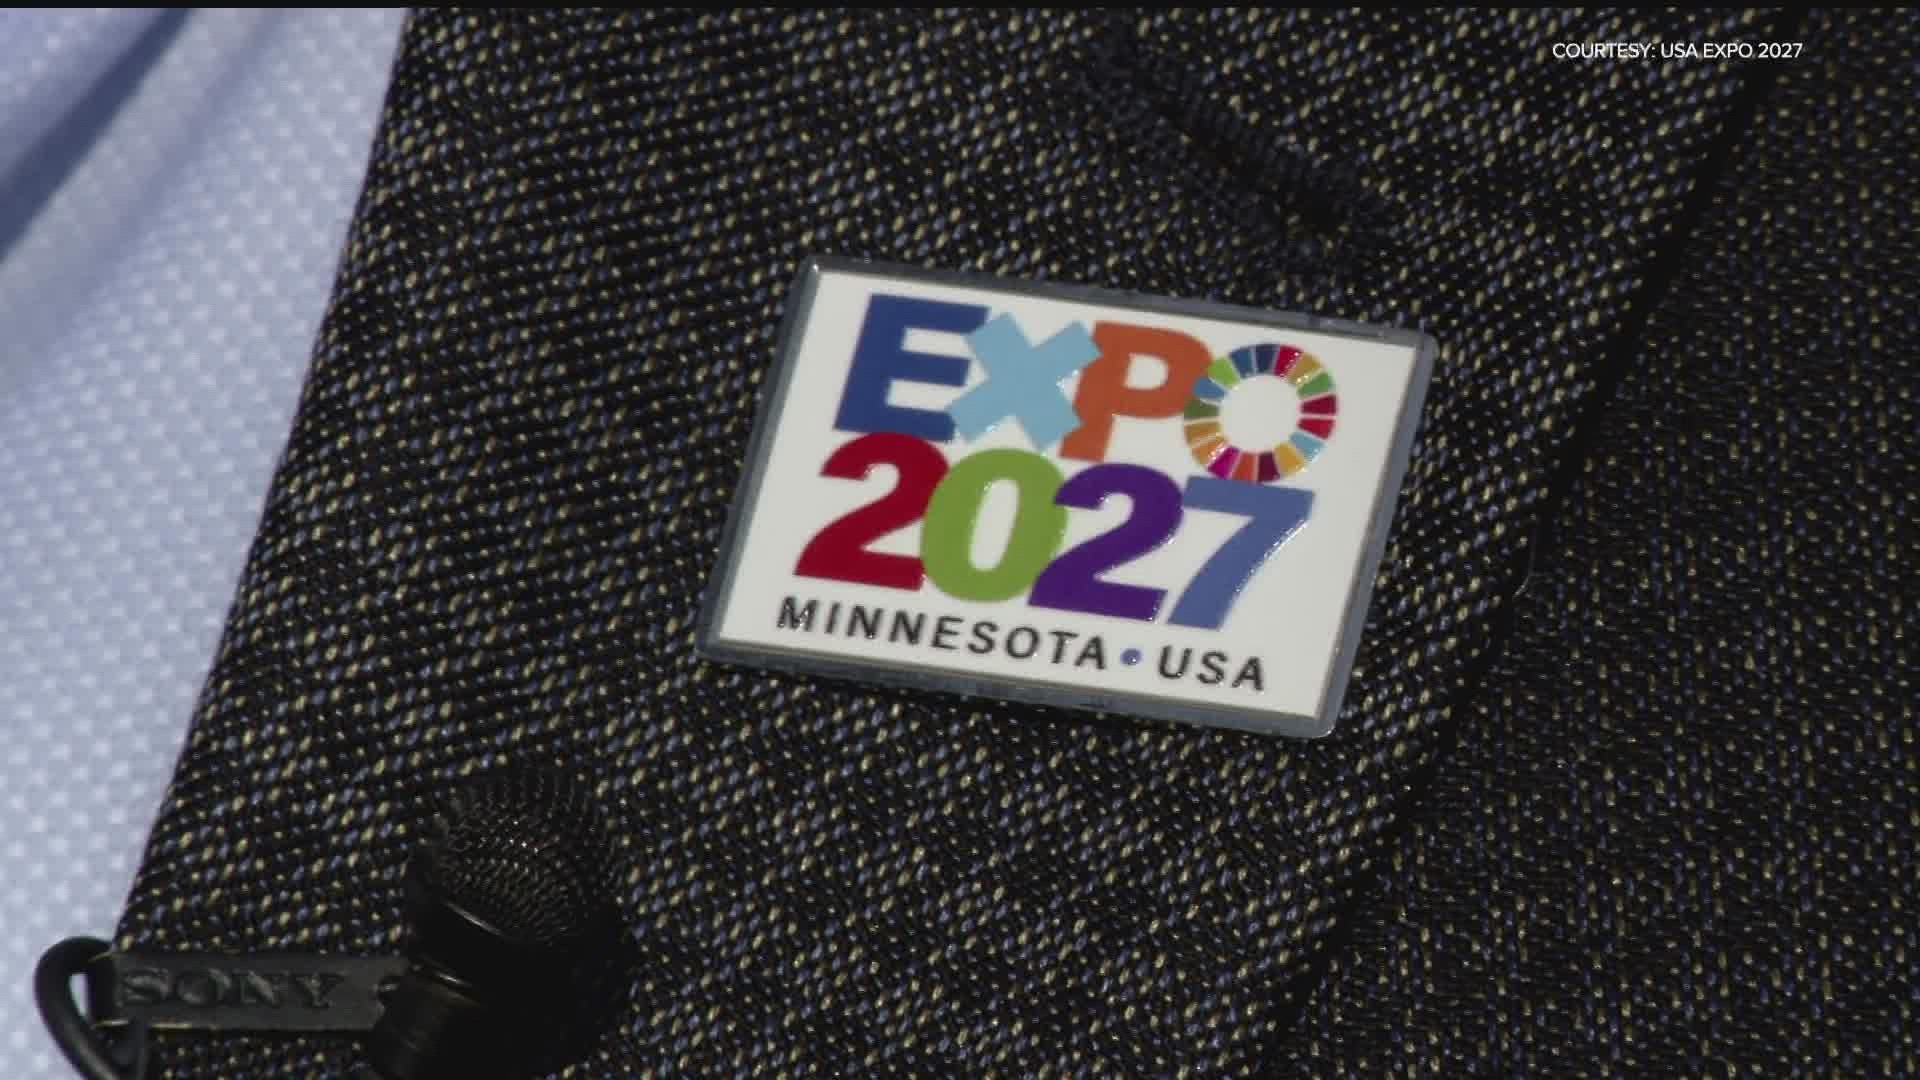 If Minnesota is chosen for the event — themed "Health People, Health Planet" — it would be held in Bloomington near MOA in 2027.